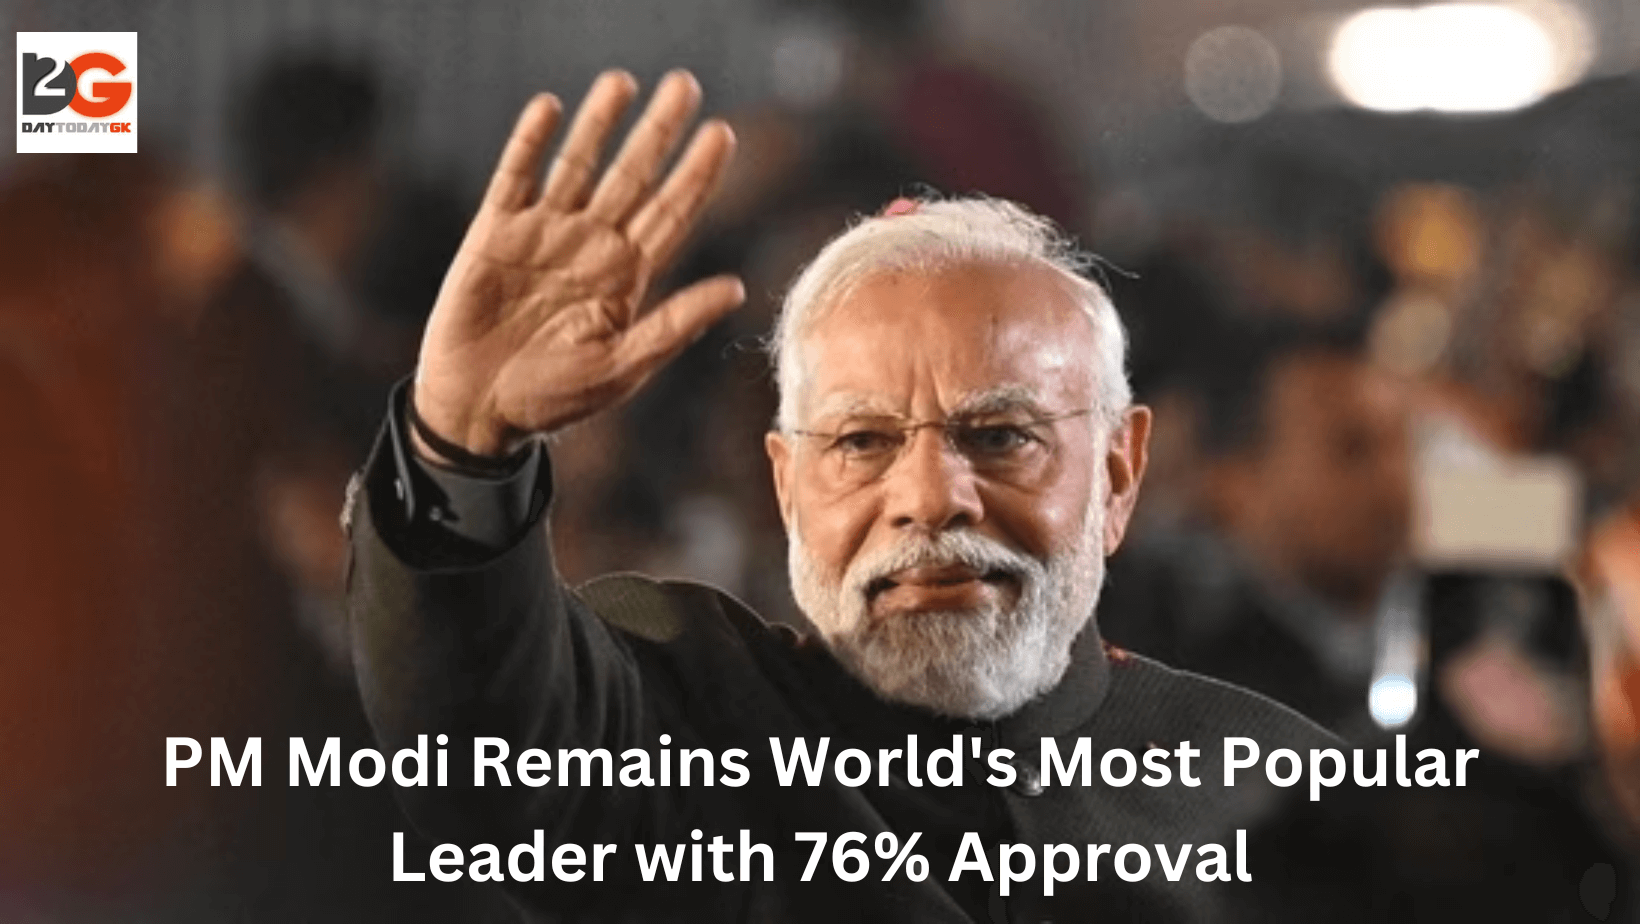 PM Modi Remains World’s Most Popular Leader with 76% Approval